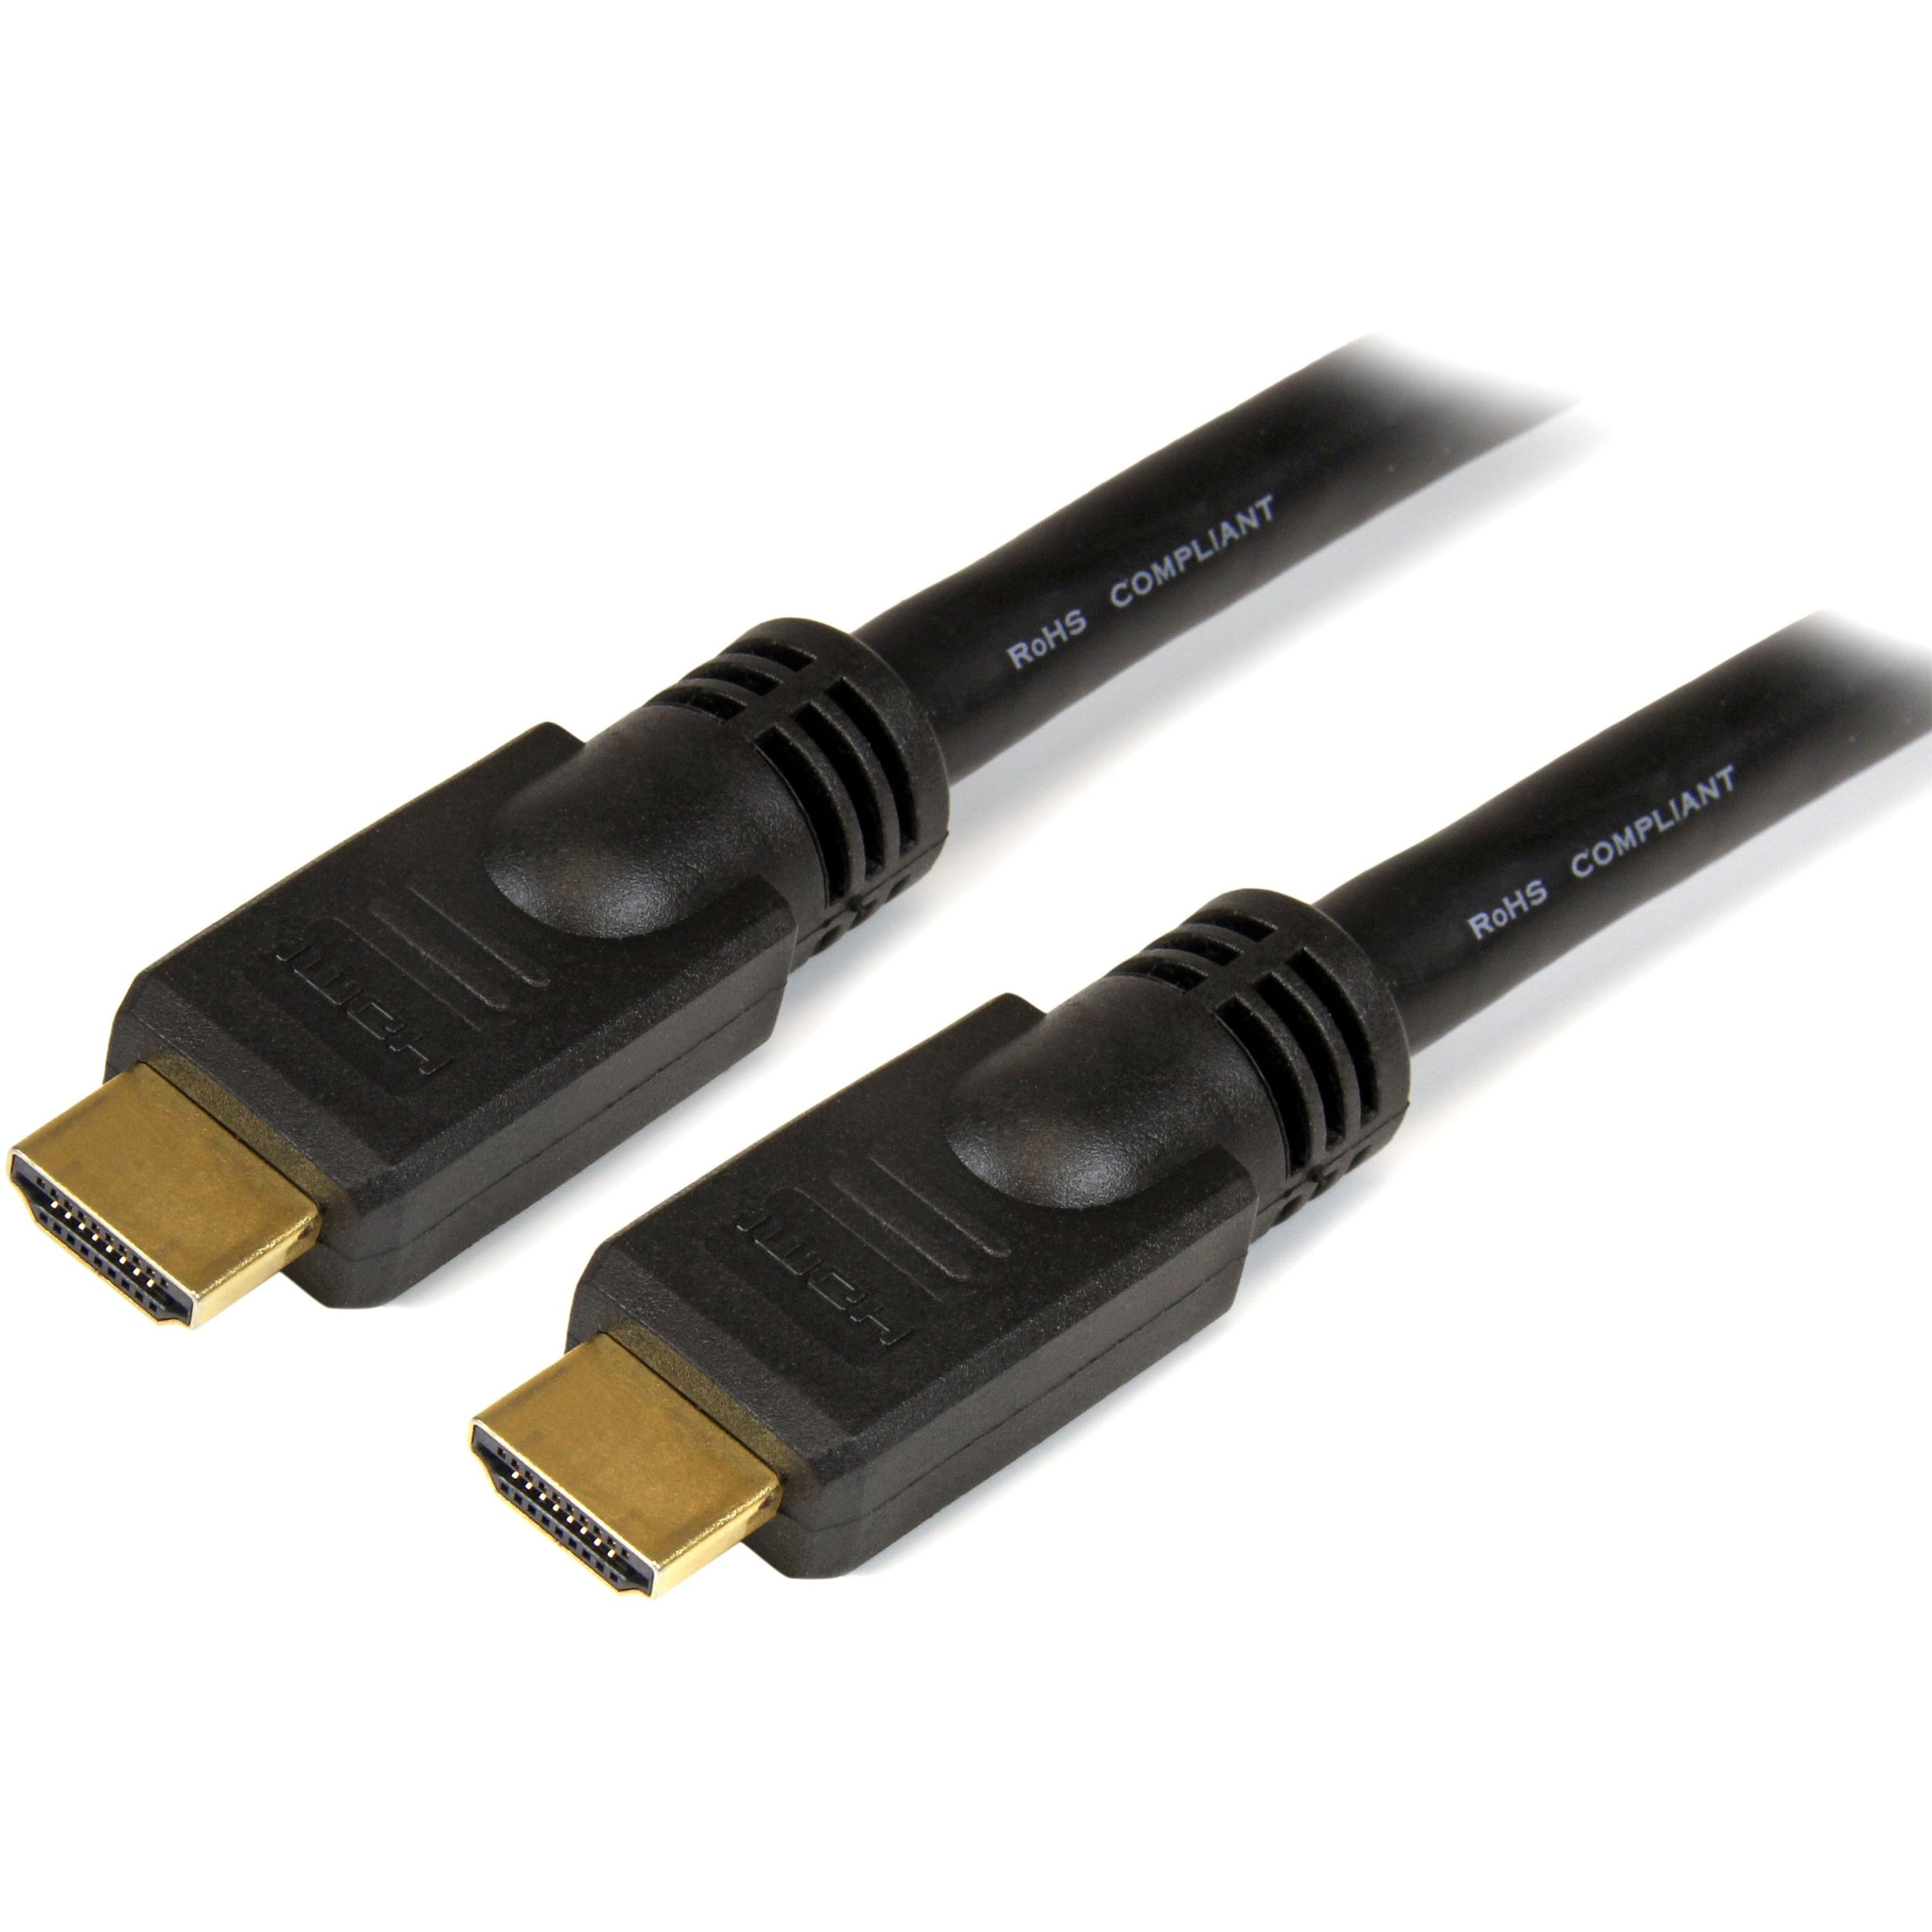 Latest Version CNE60539 C&E High Speed HDMI Cable 25 Feet with Ethernet Supports 3D and Audio Return 